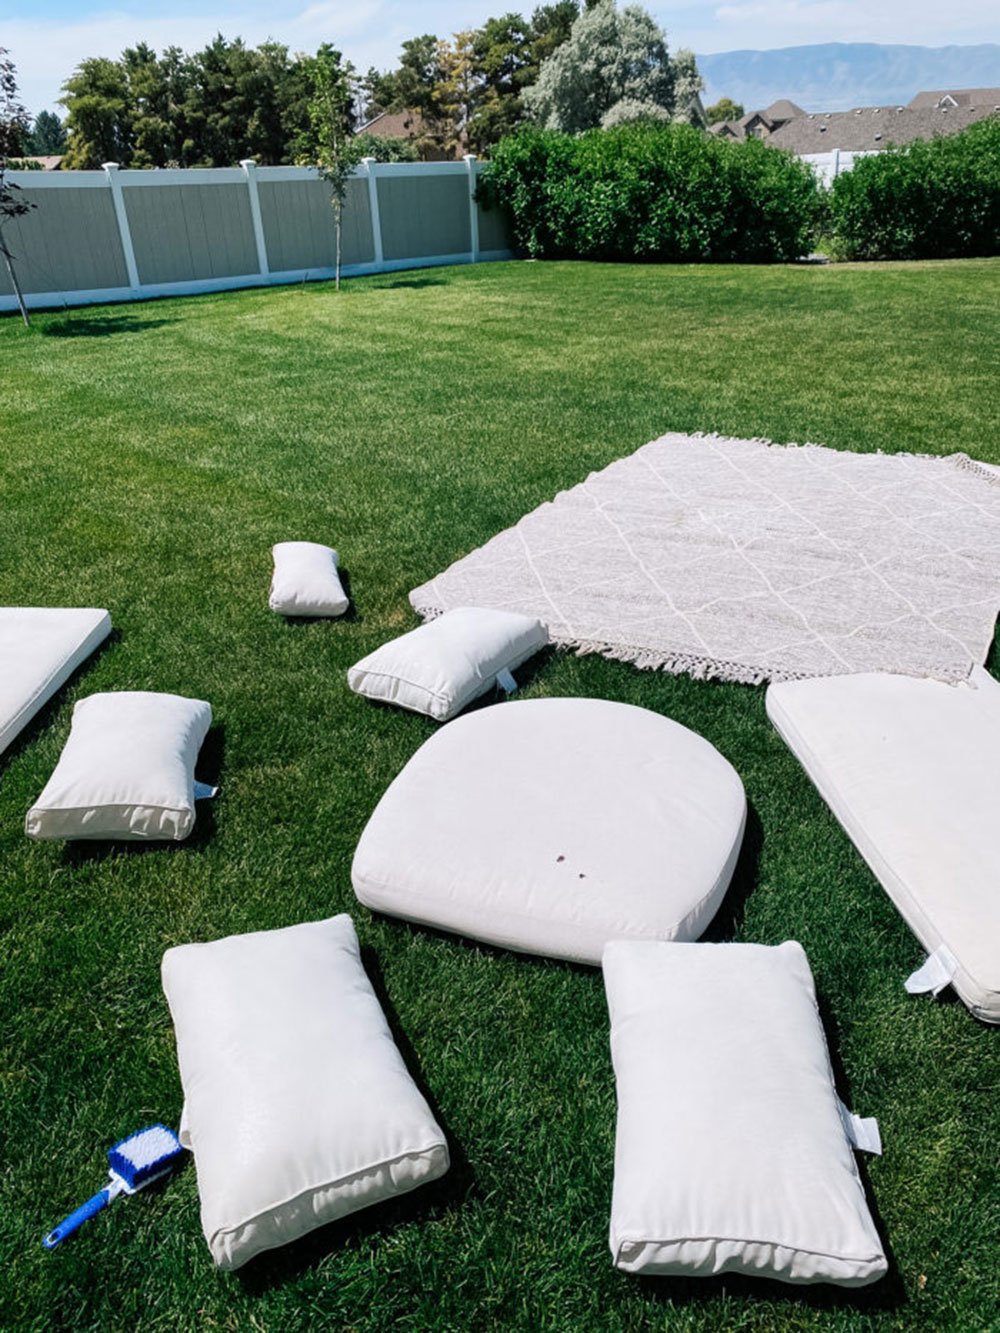 How To Clean Outdoor Furniture Cushions, Garden Furniture Cushions Get Wet